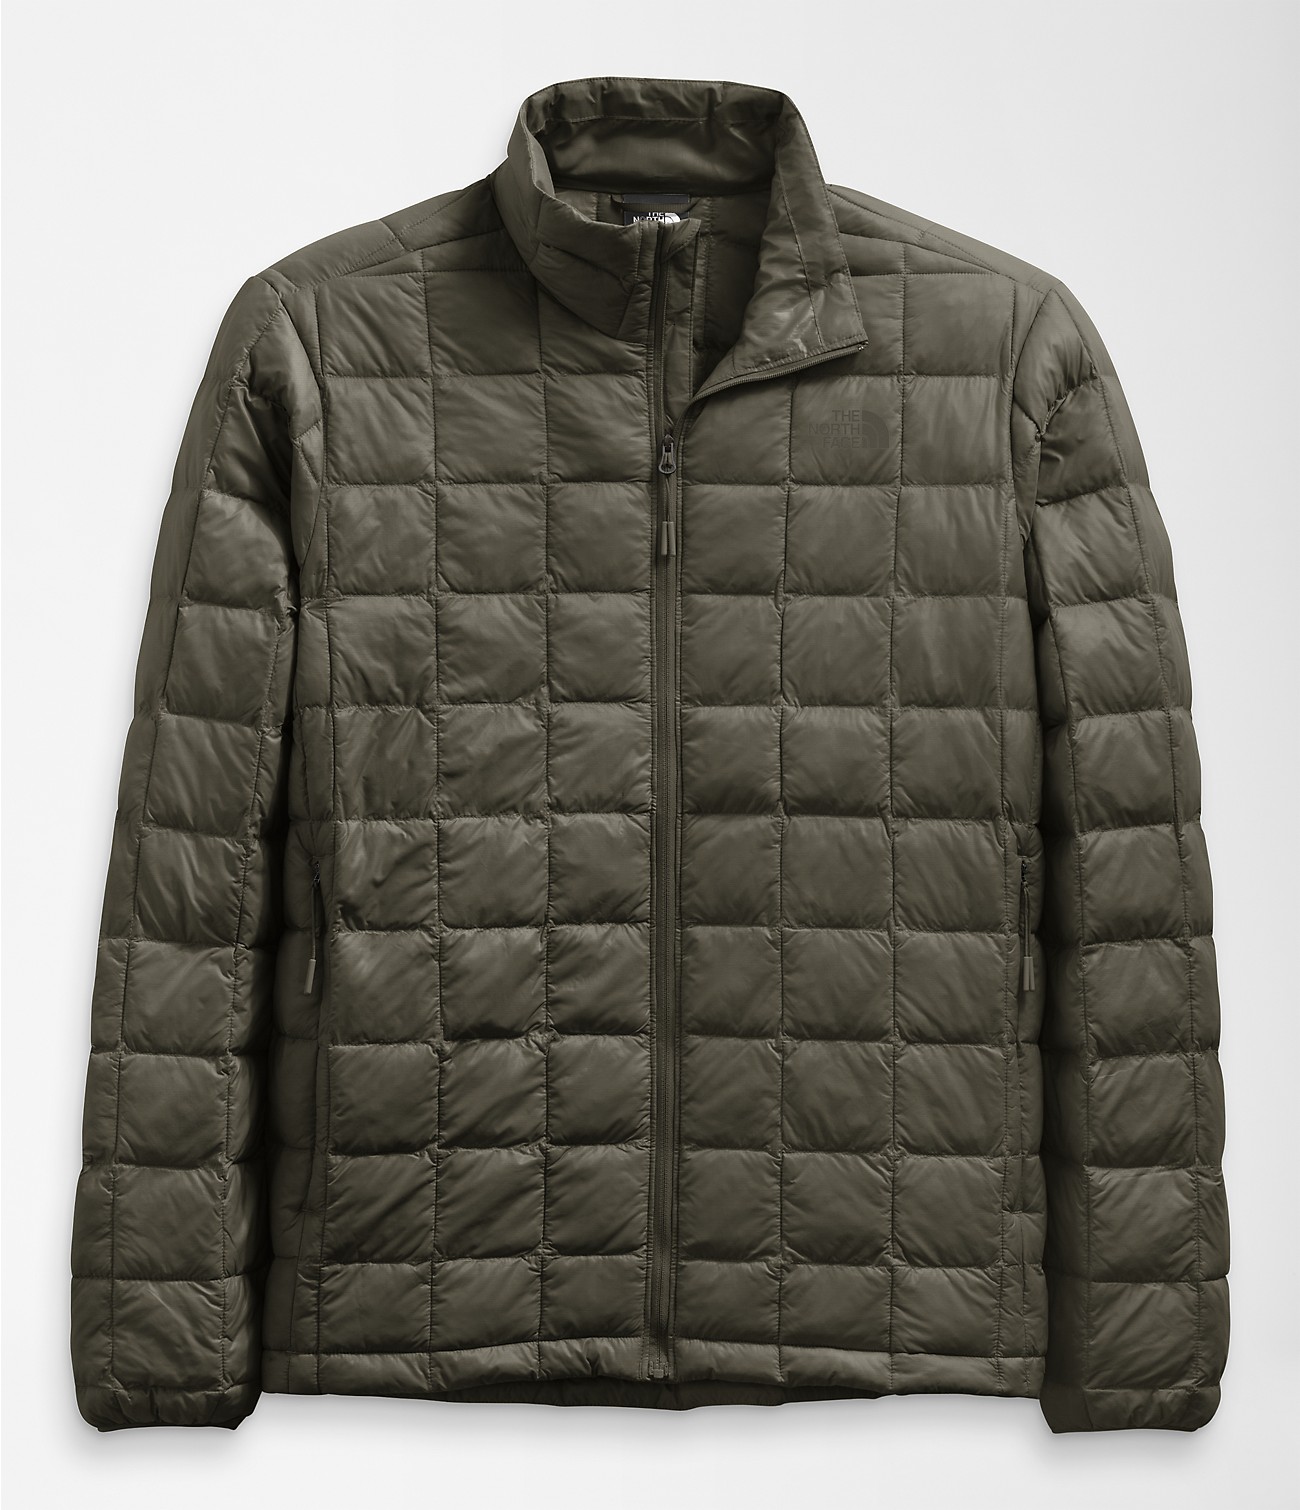 Unlock Wilderness' choice in the Montbell Vs North Face comparison, the ThermoBall™ Eco Jacket 2.0 by The North Face